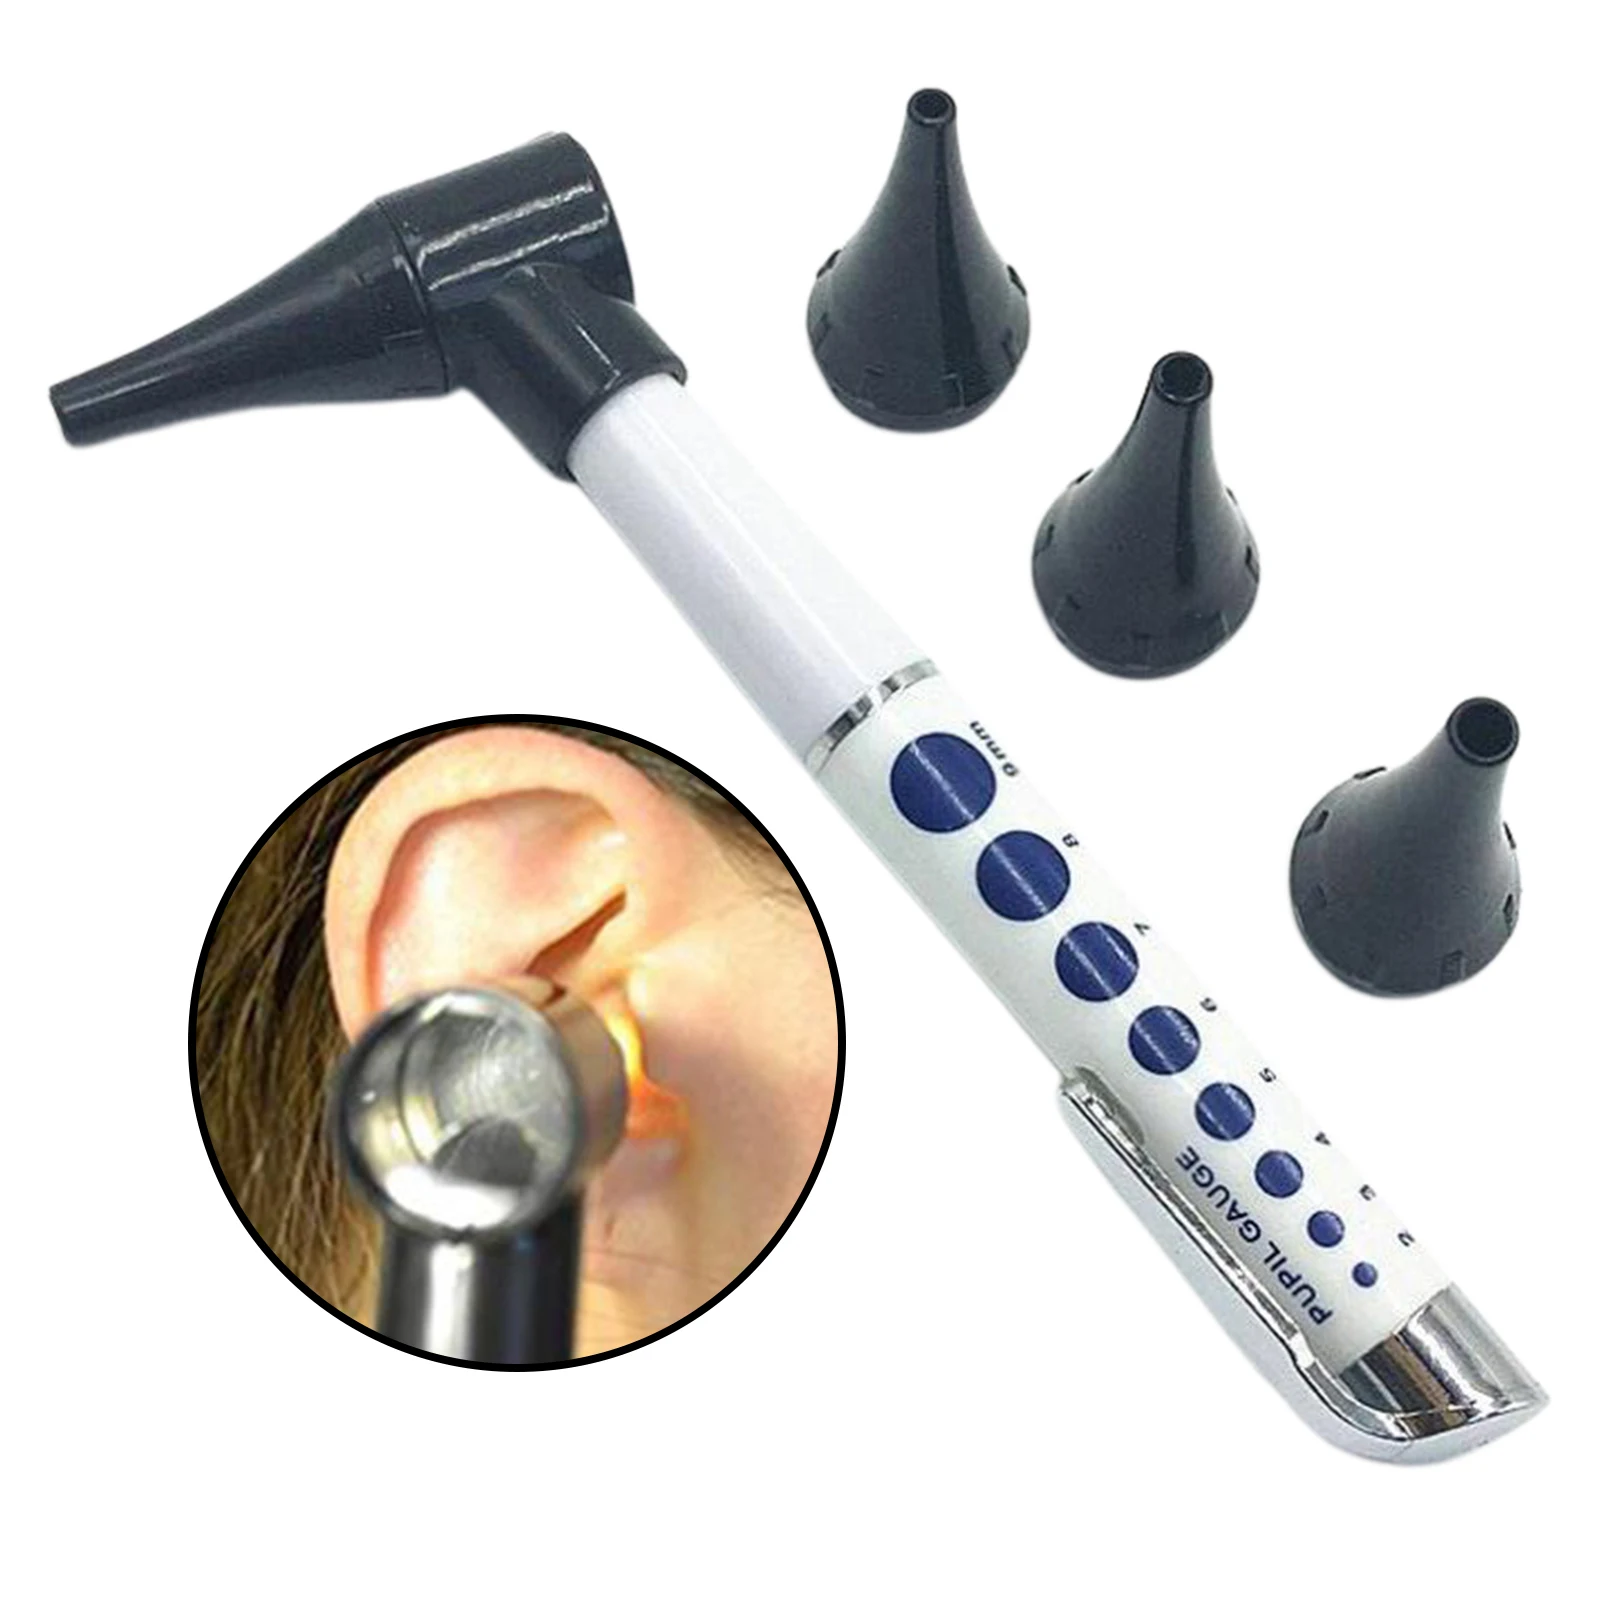 White Professional Mini Clinical Diagnostic Otoscope Ophthalmoscope Instruments Ear Light Ear Magnifier Set New